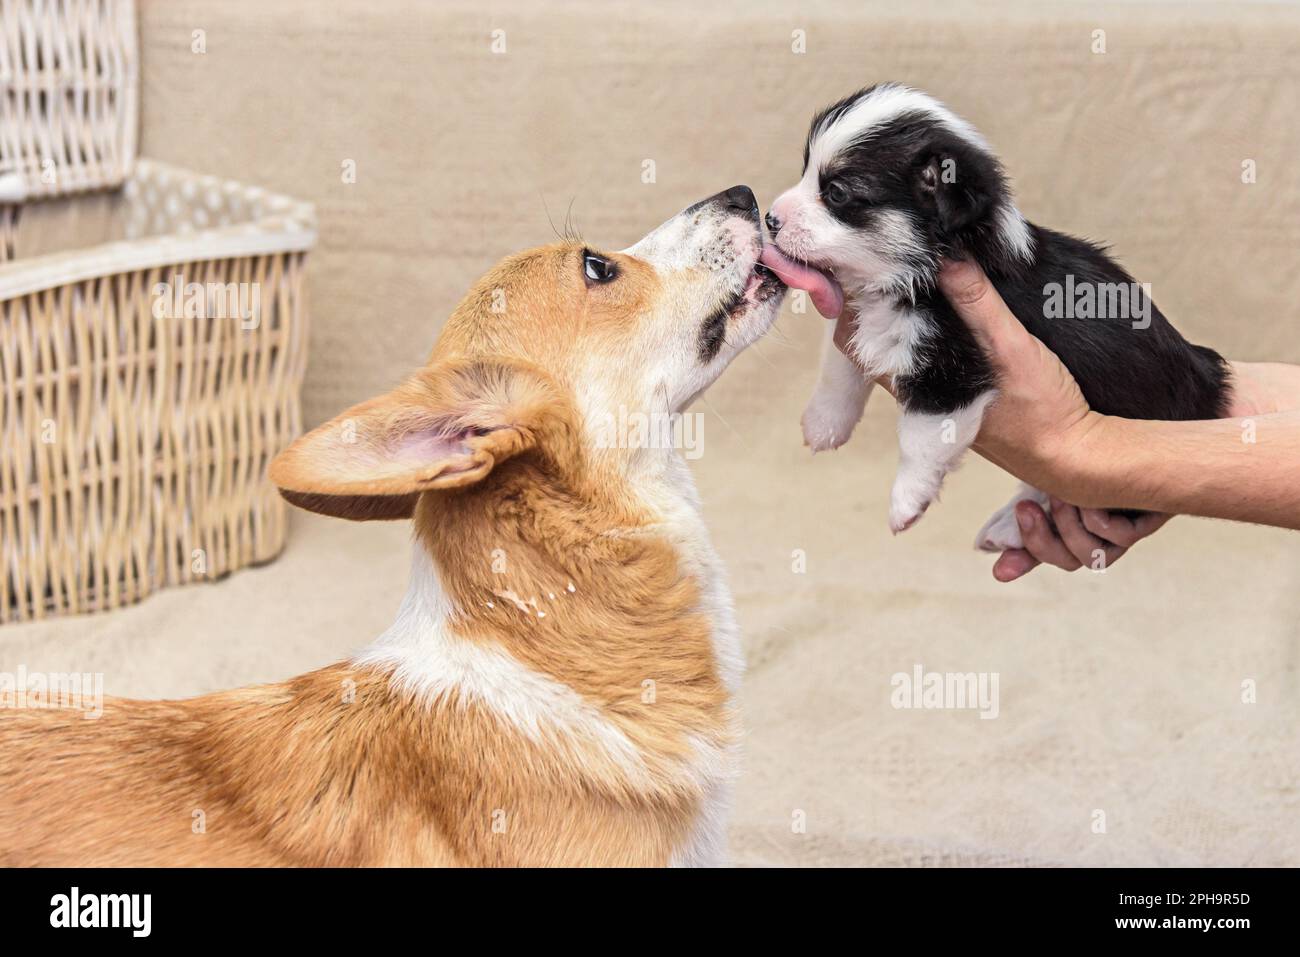 A mom dog licks her puppy after feeding. Welsh Corgi, Pets, Mother and Son Stock Photo